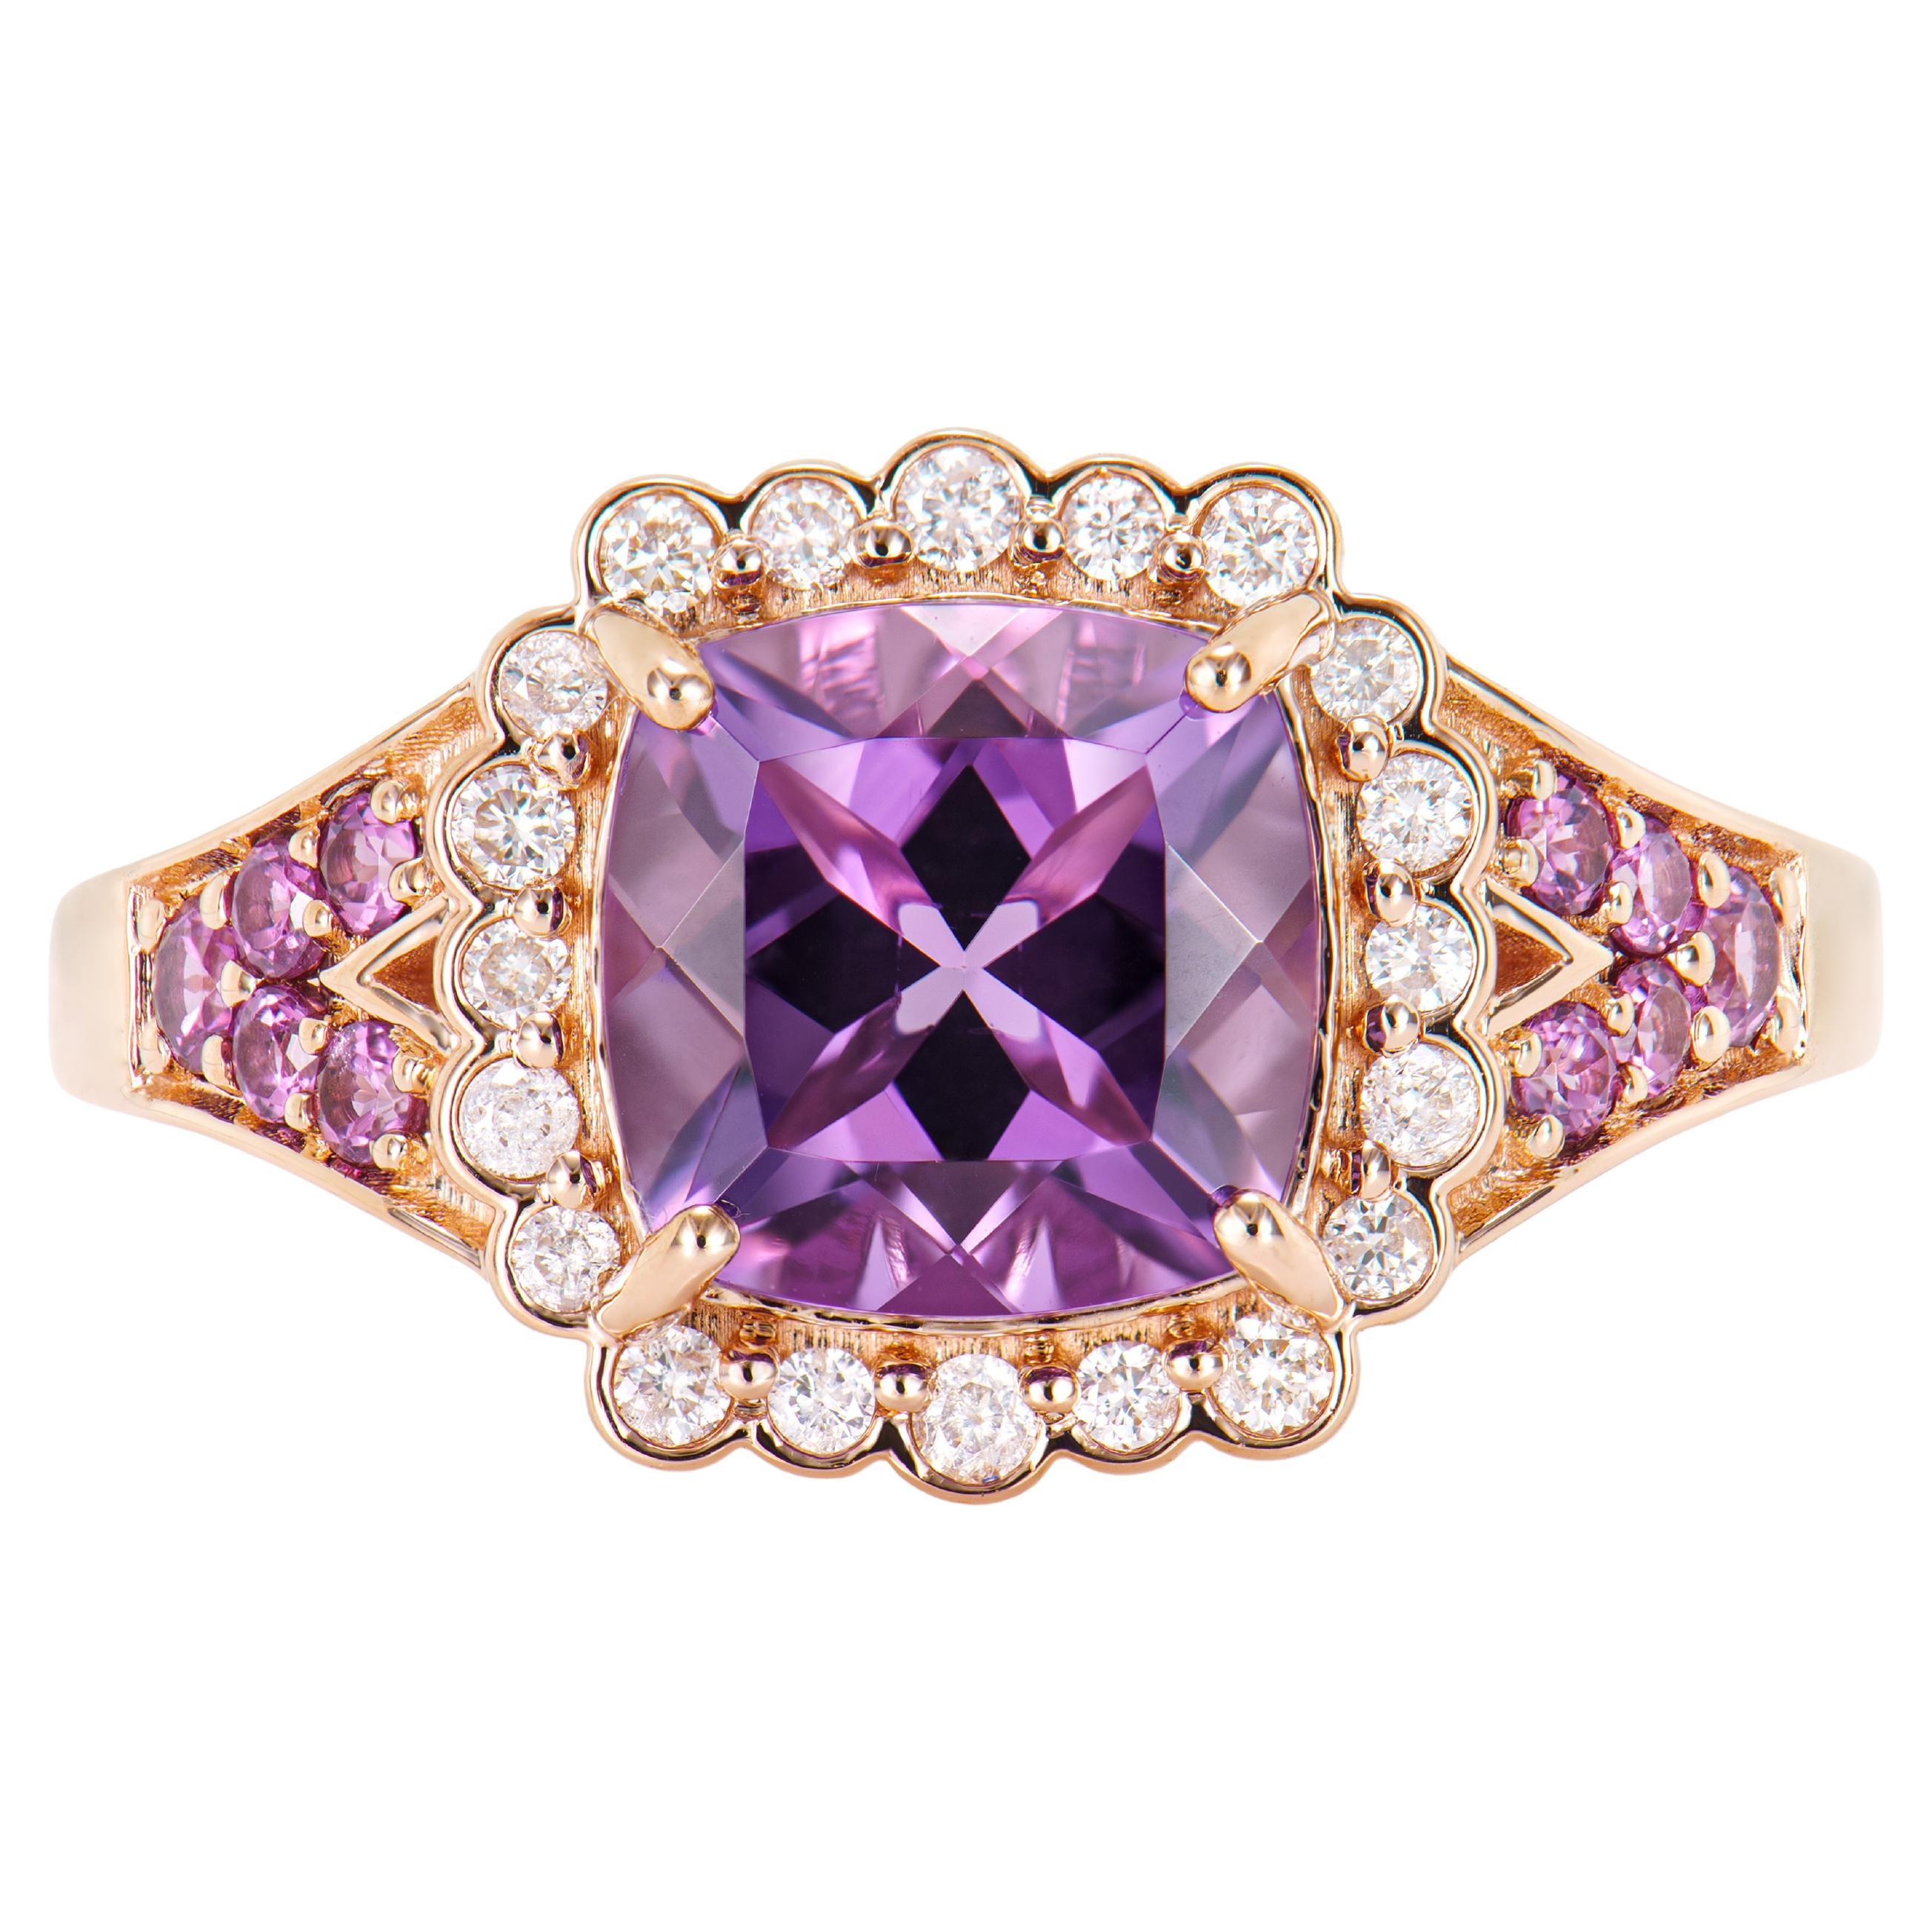 2.05 Carat Amethyst Fancy Ring in 14KRG with Rhodolite and White Diamond.   For Sale